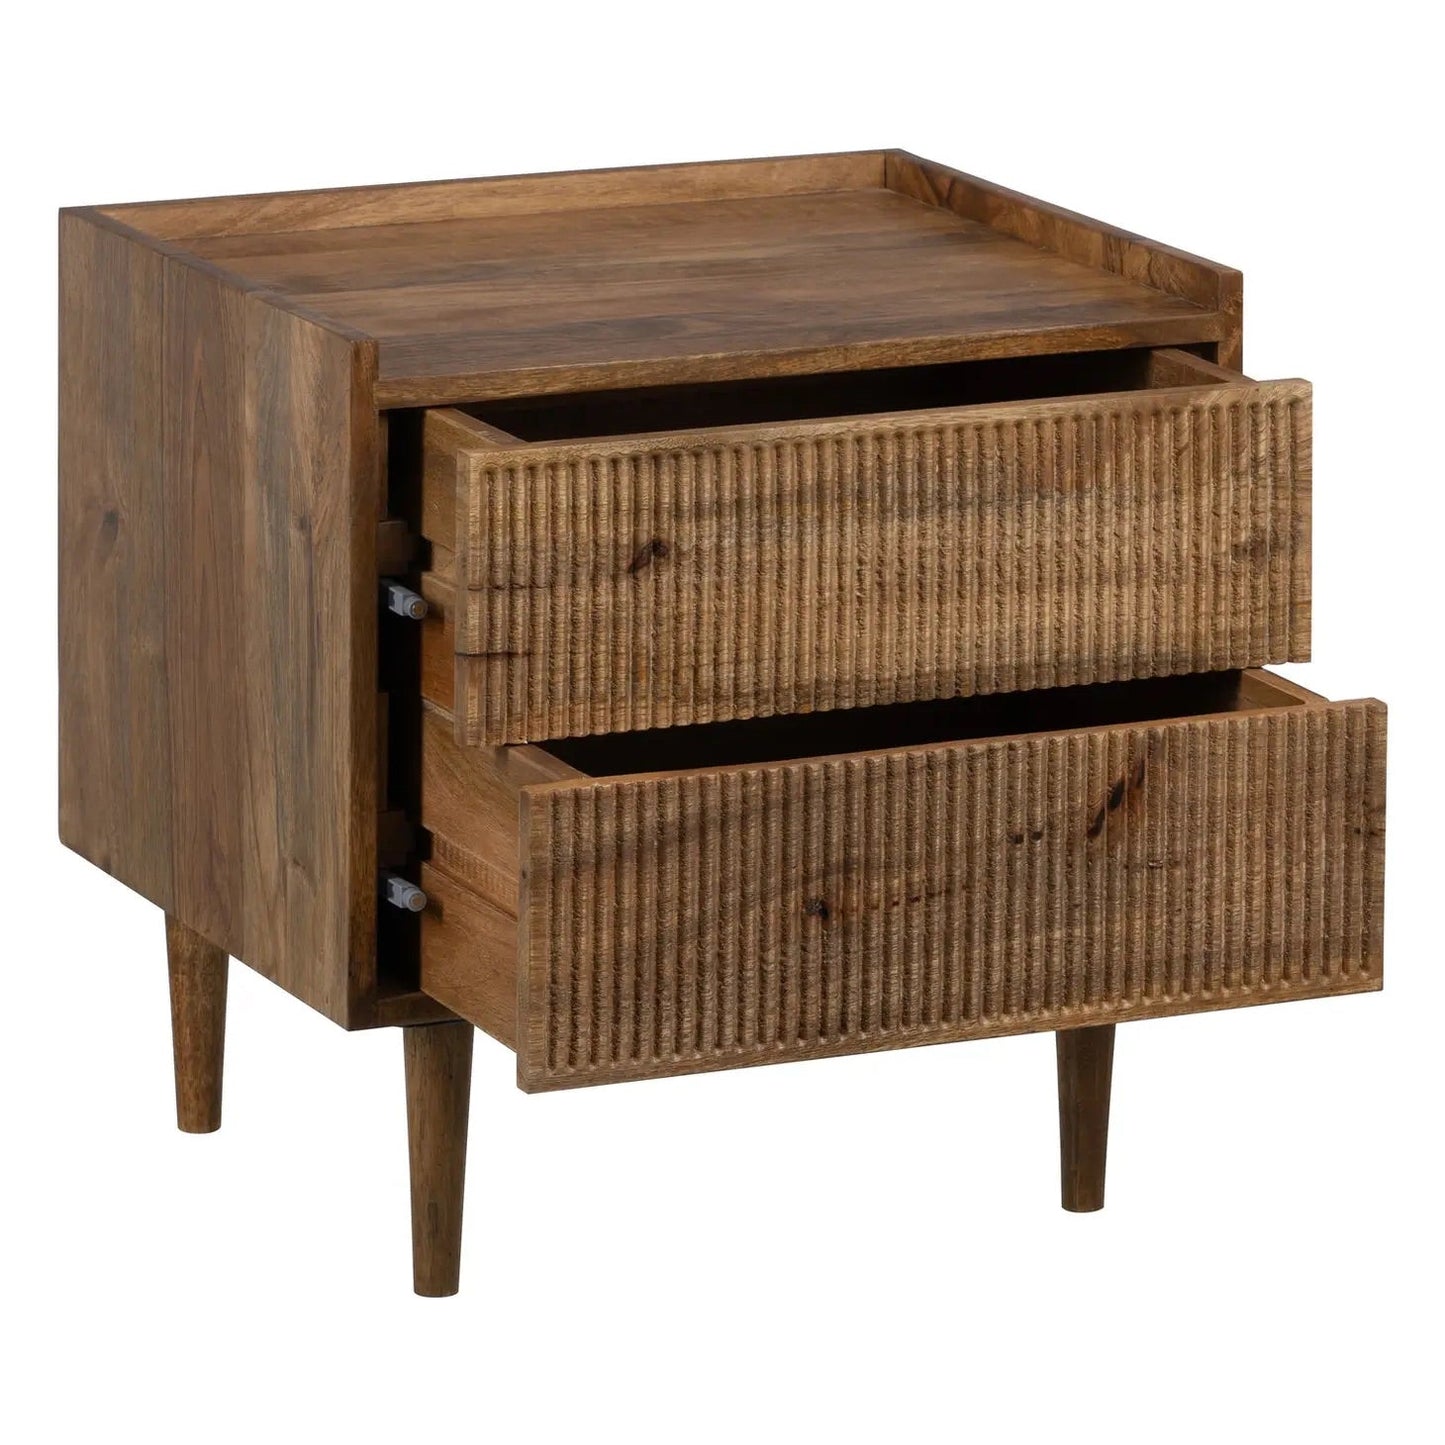 Moore Natural Mango Wood Nightstand with 2 Storage Drawers, Line Textured Pattern, European Style